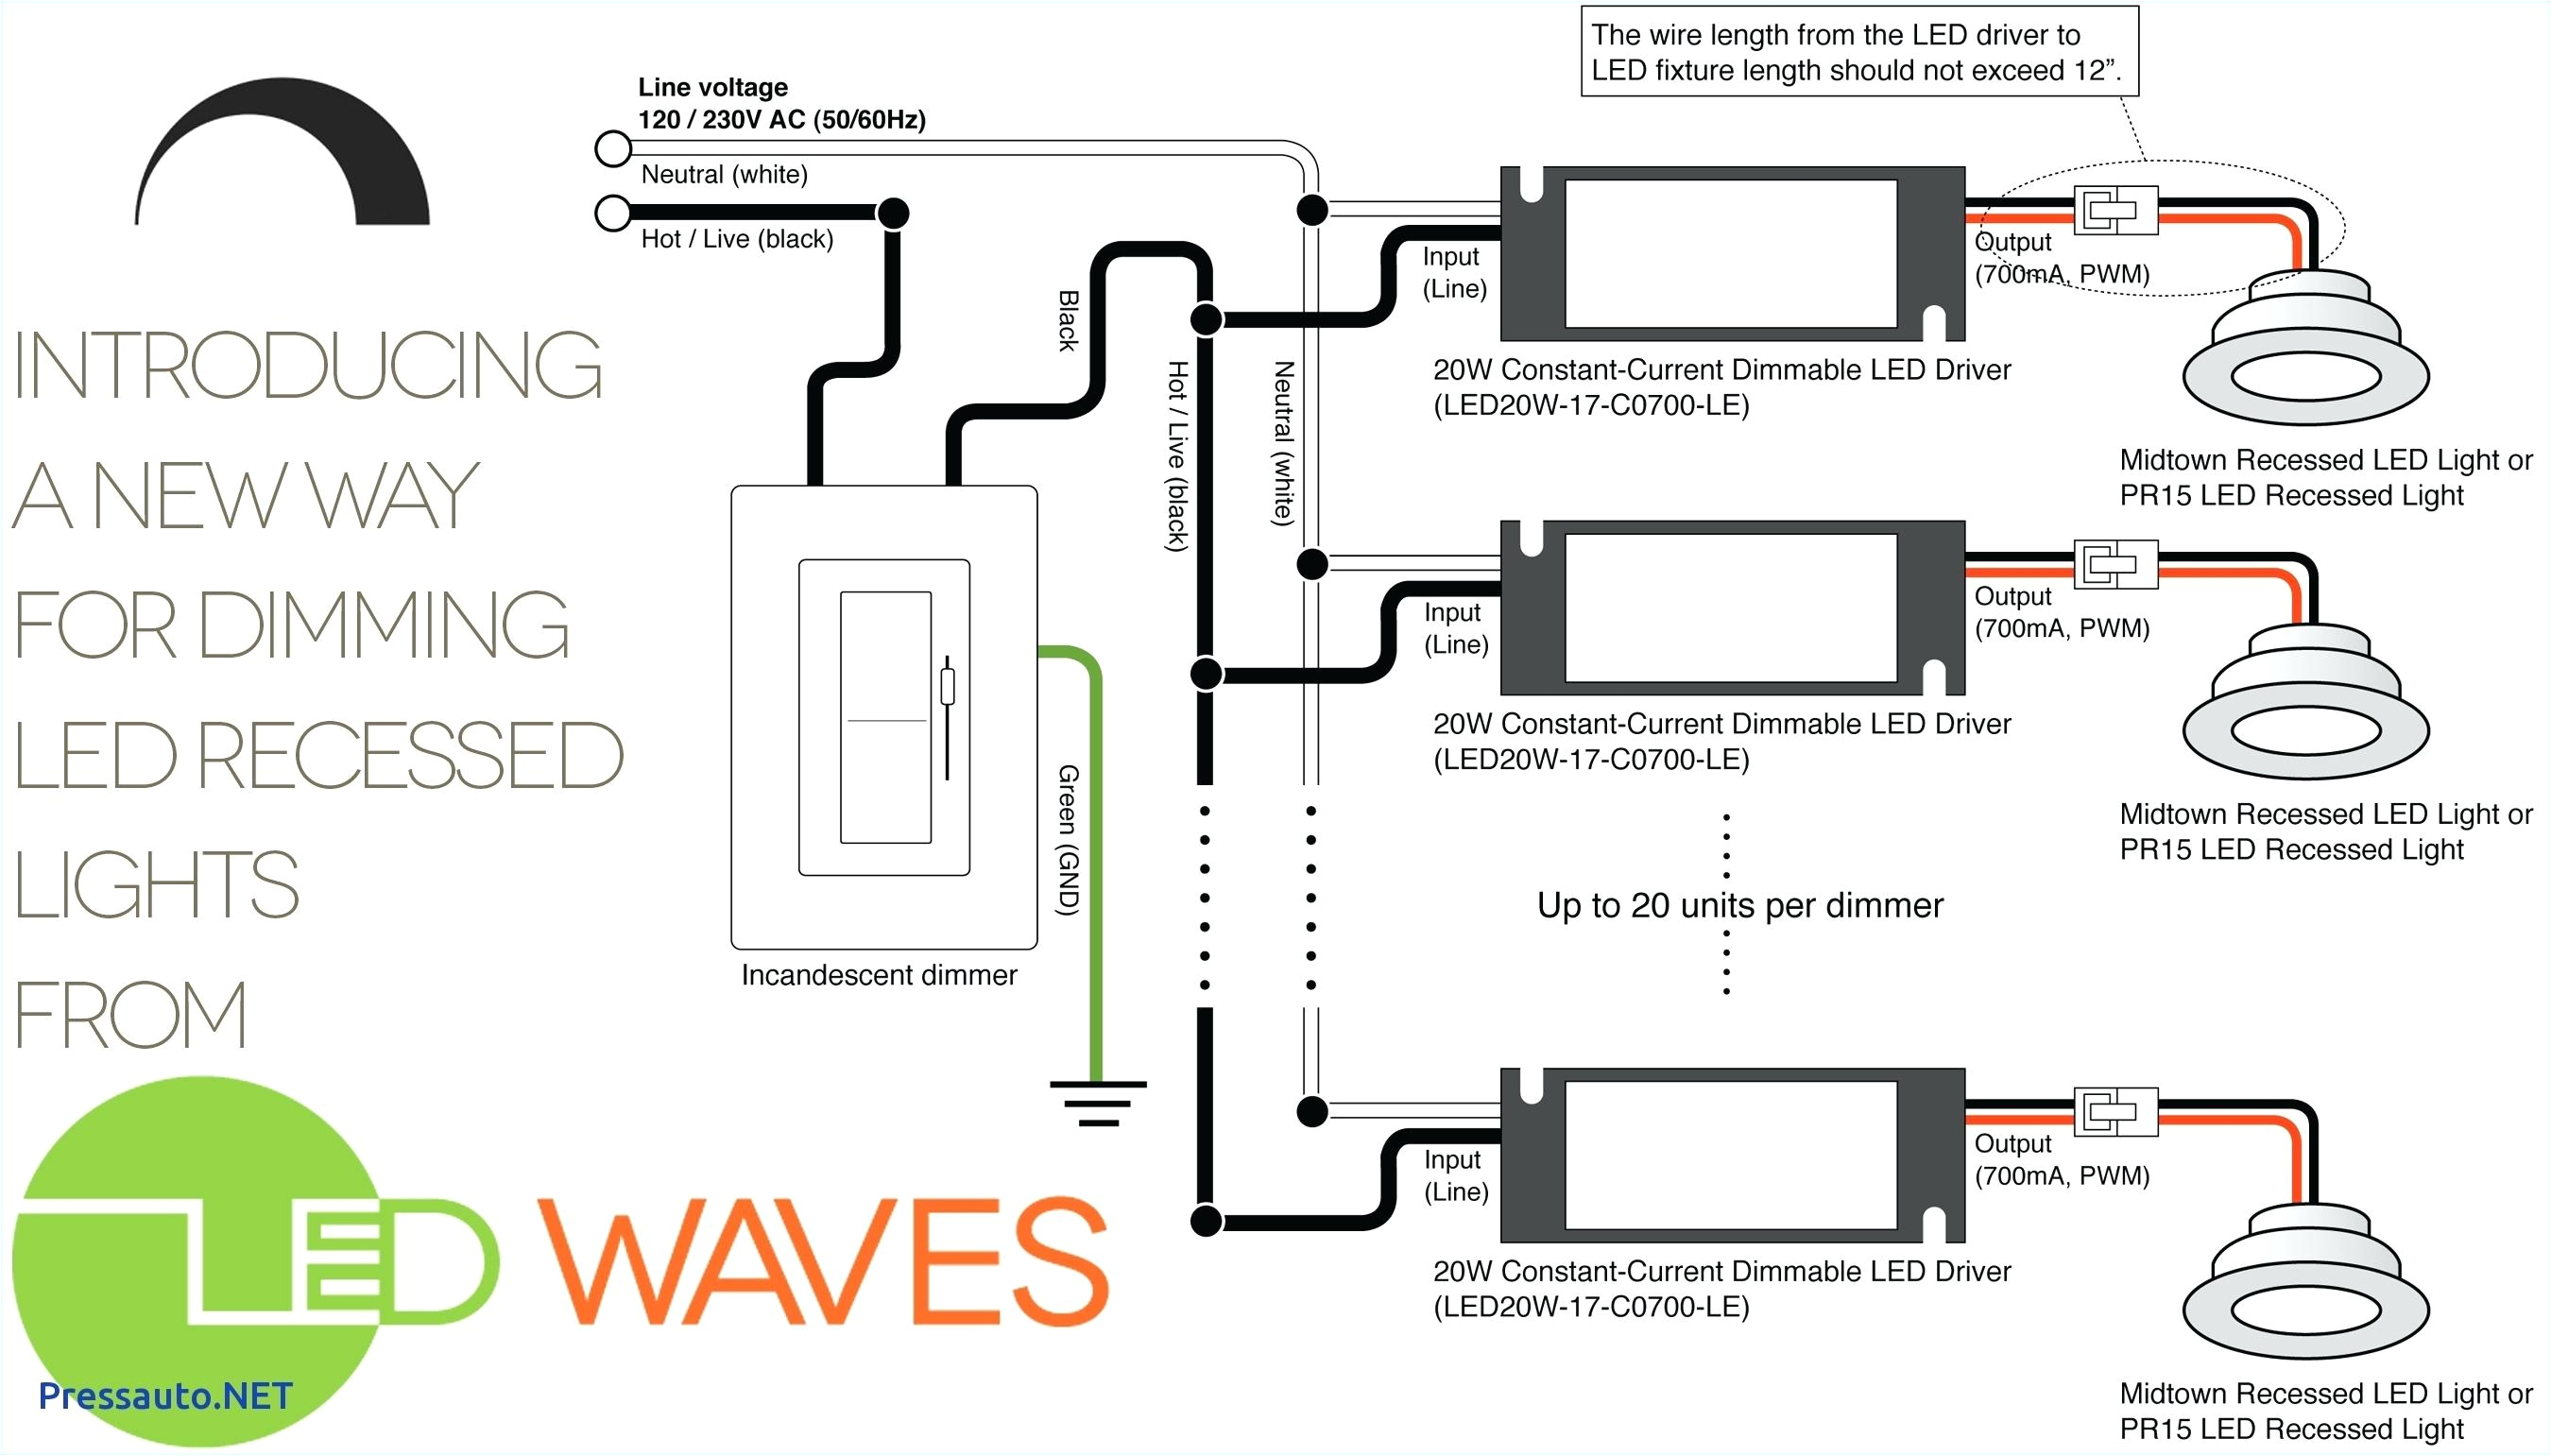 lutron 3 way led dimmer wiring diagram lutron 3 way led dimmer wiring diagram download